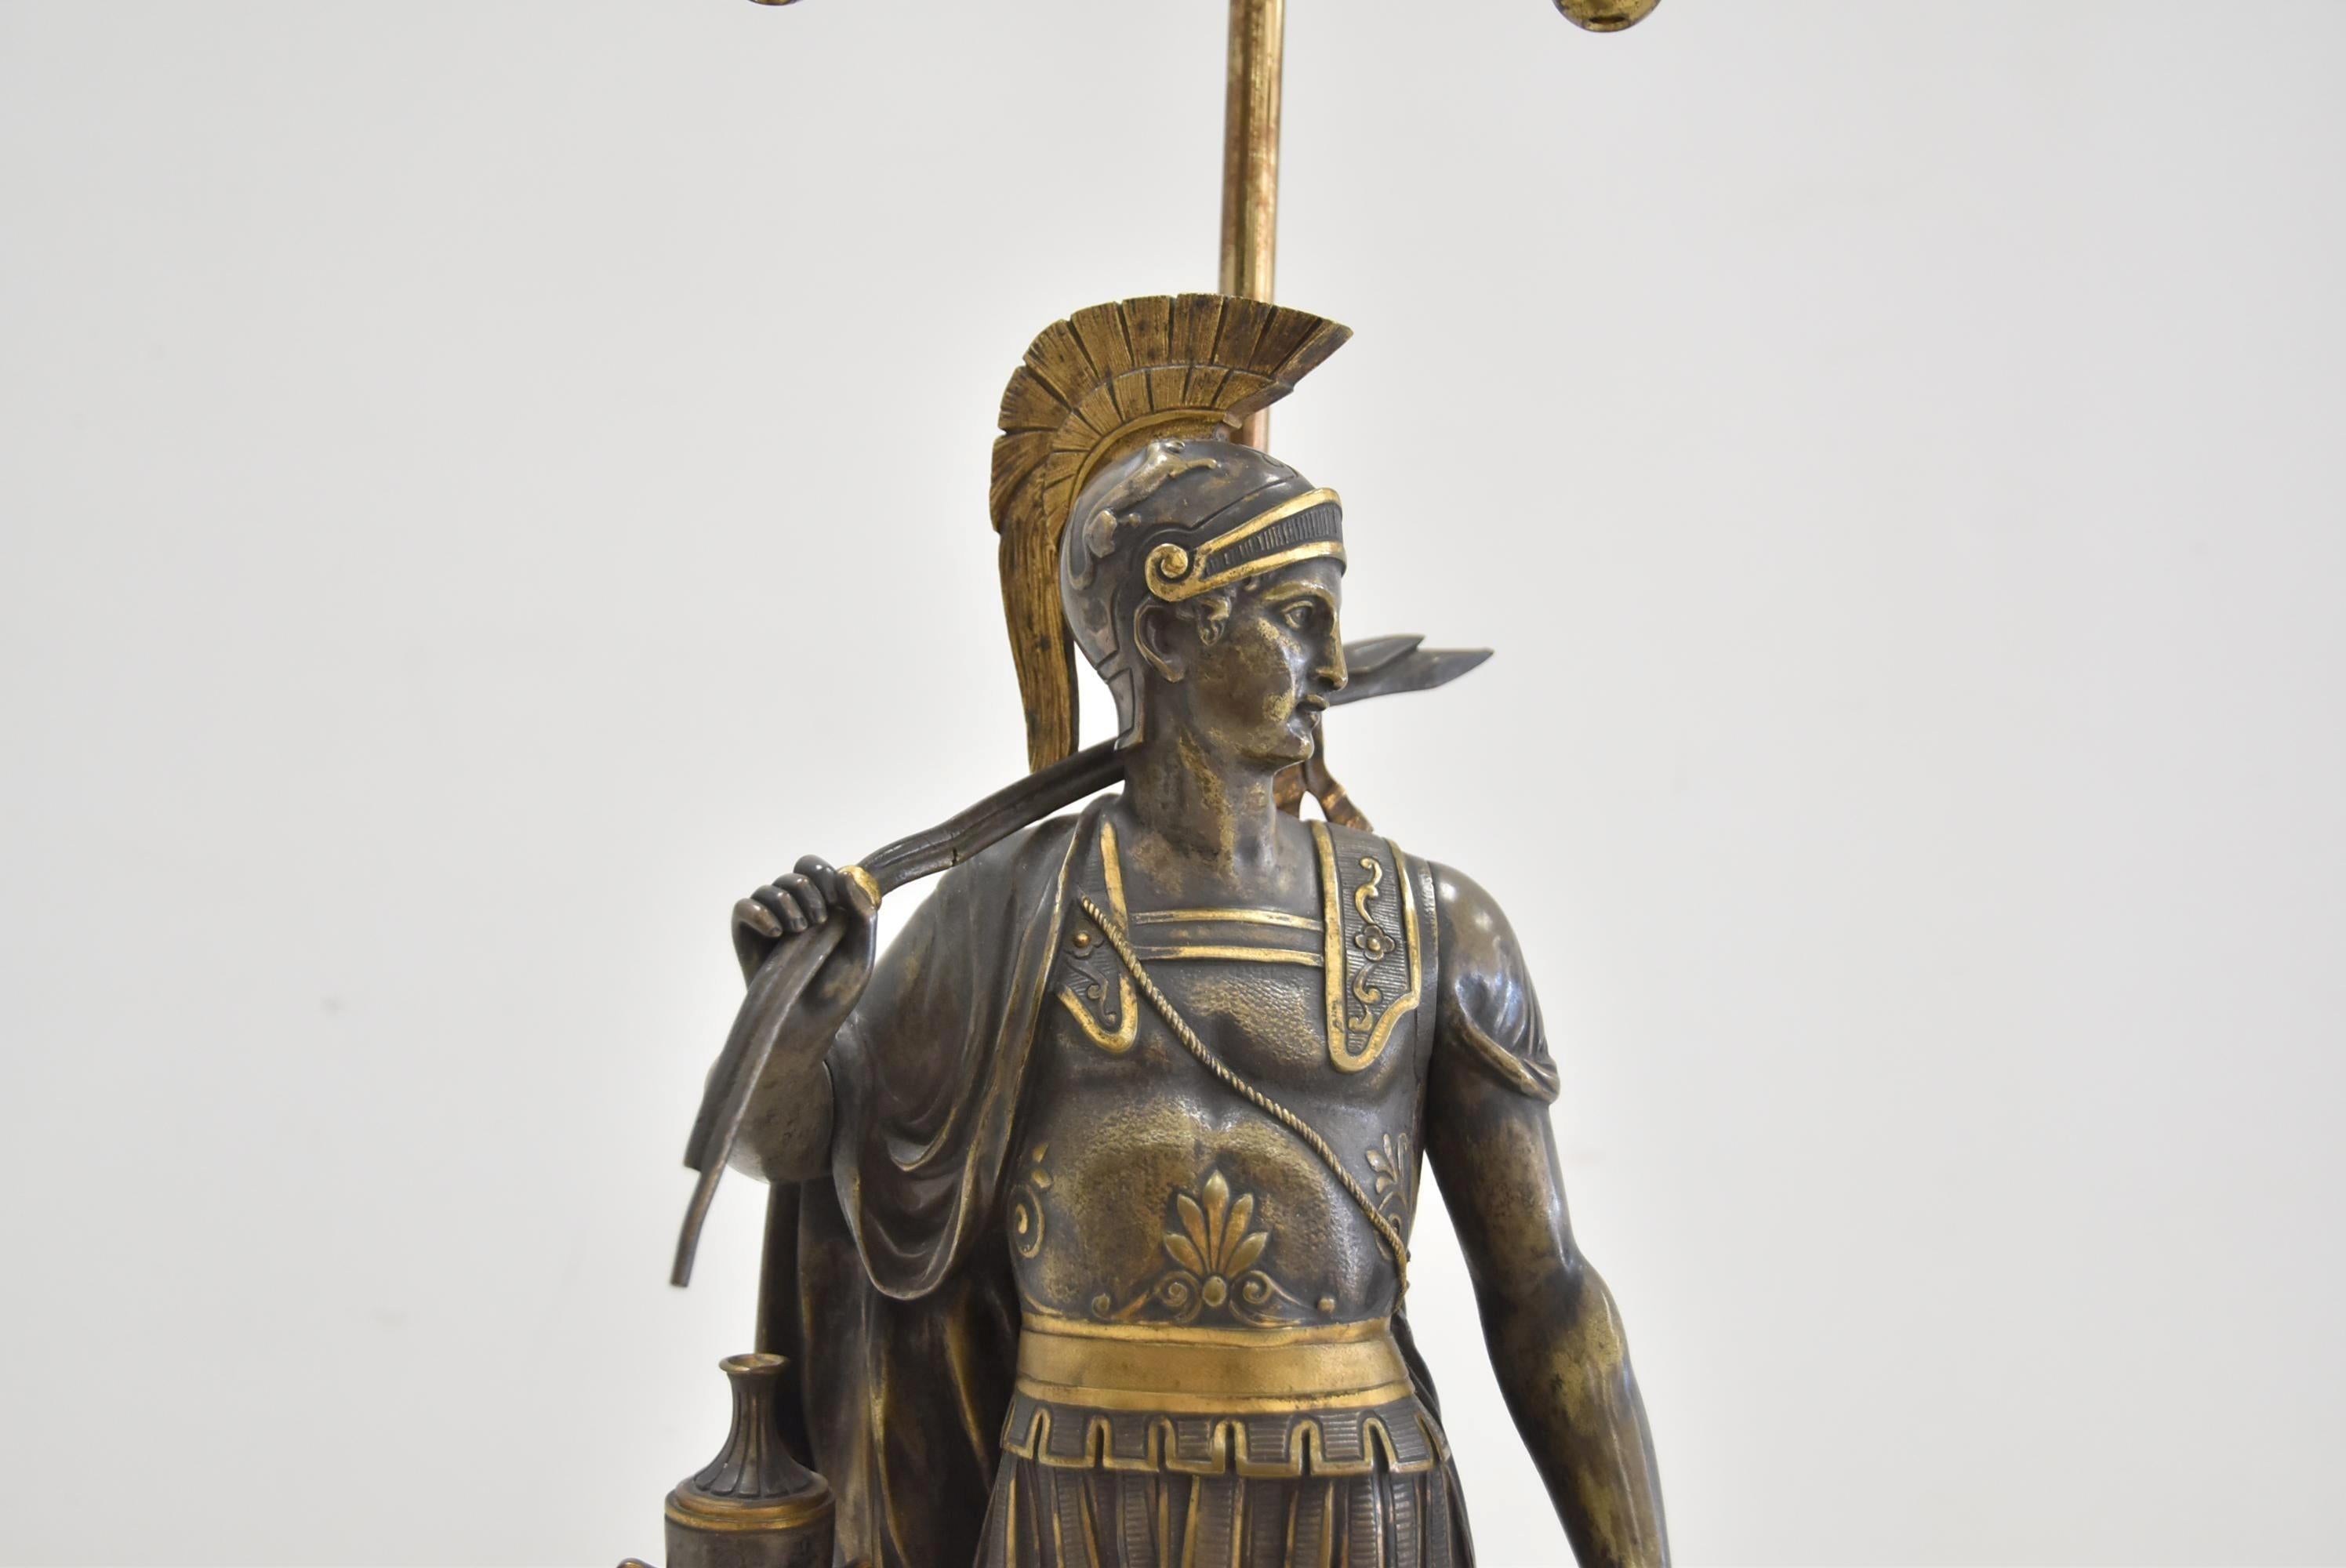 A beautiful 19th century continental classical bronze of a Roman soldier made into a lamp.